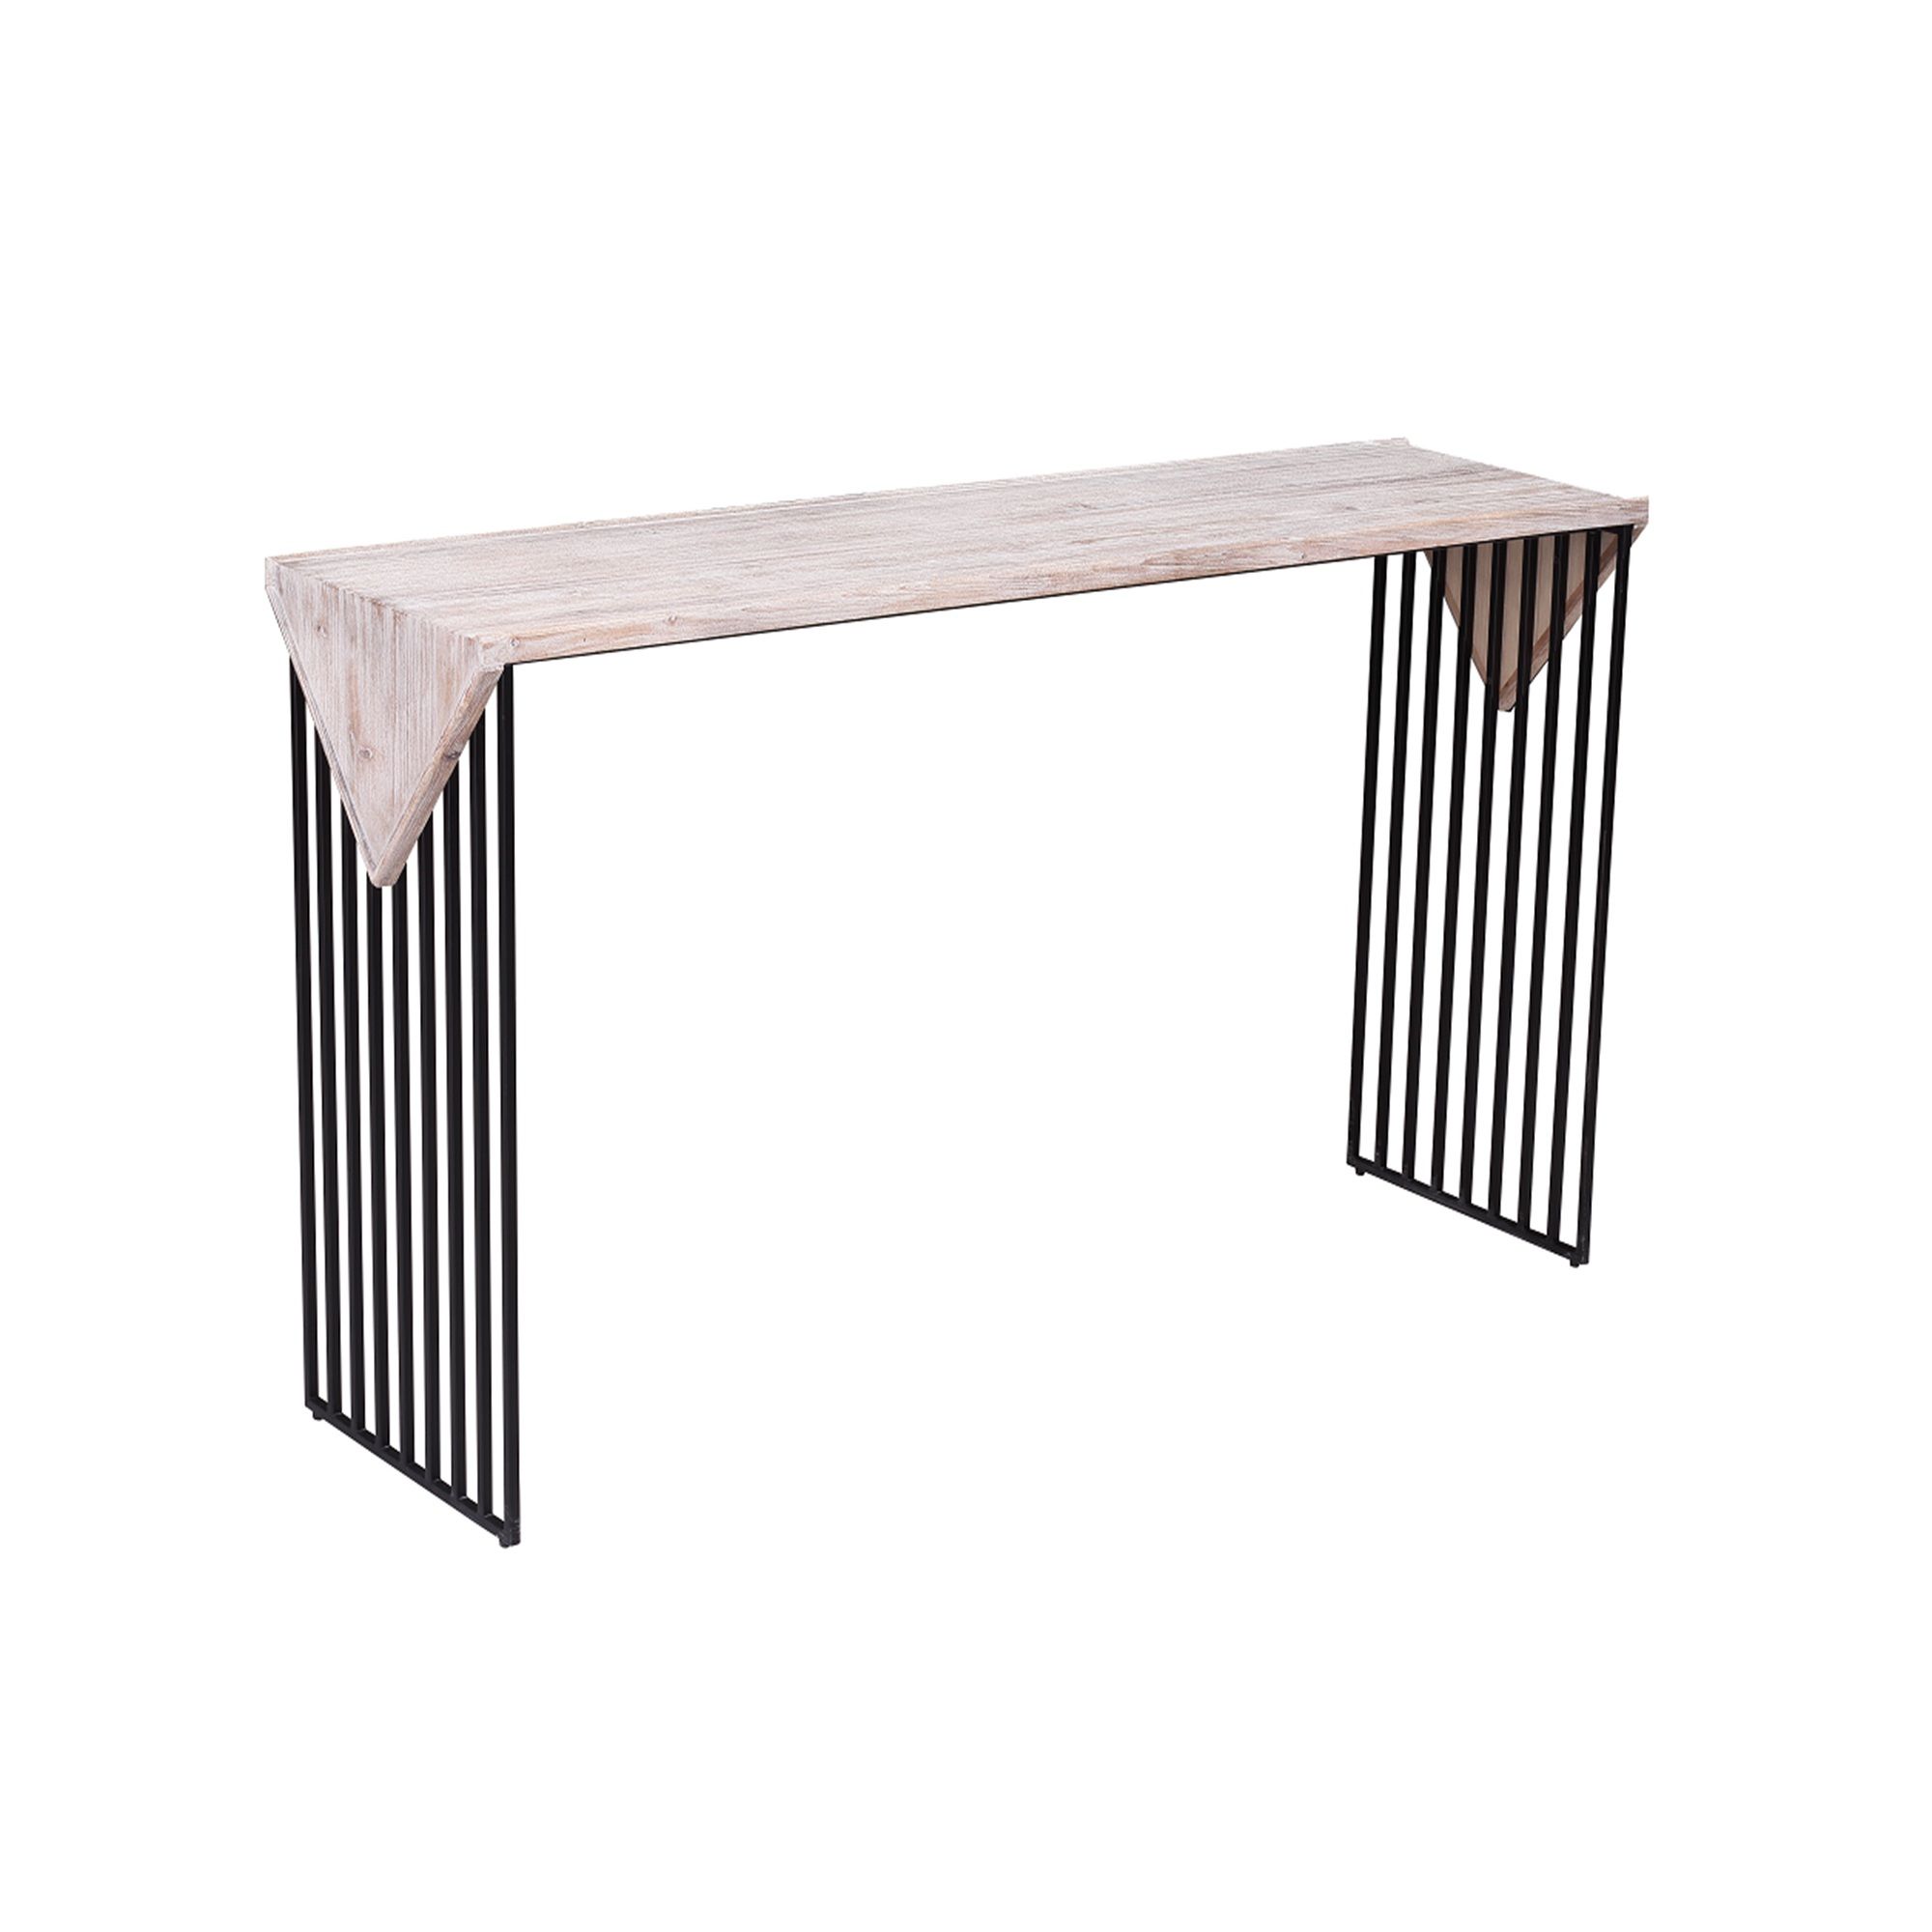 Rectangular Wooden Console Table With Sled Wire Base, Gray Within Wood Rectangular Console Tables (View 14 of 20)